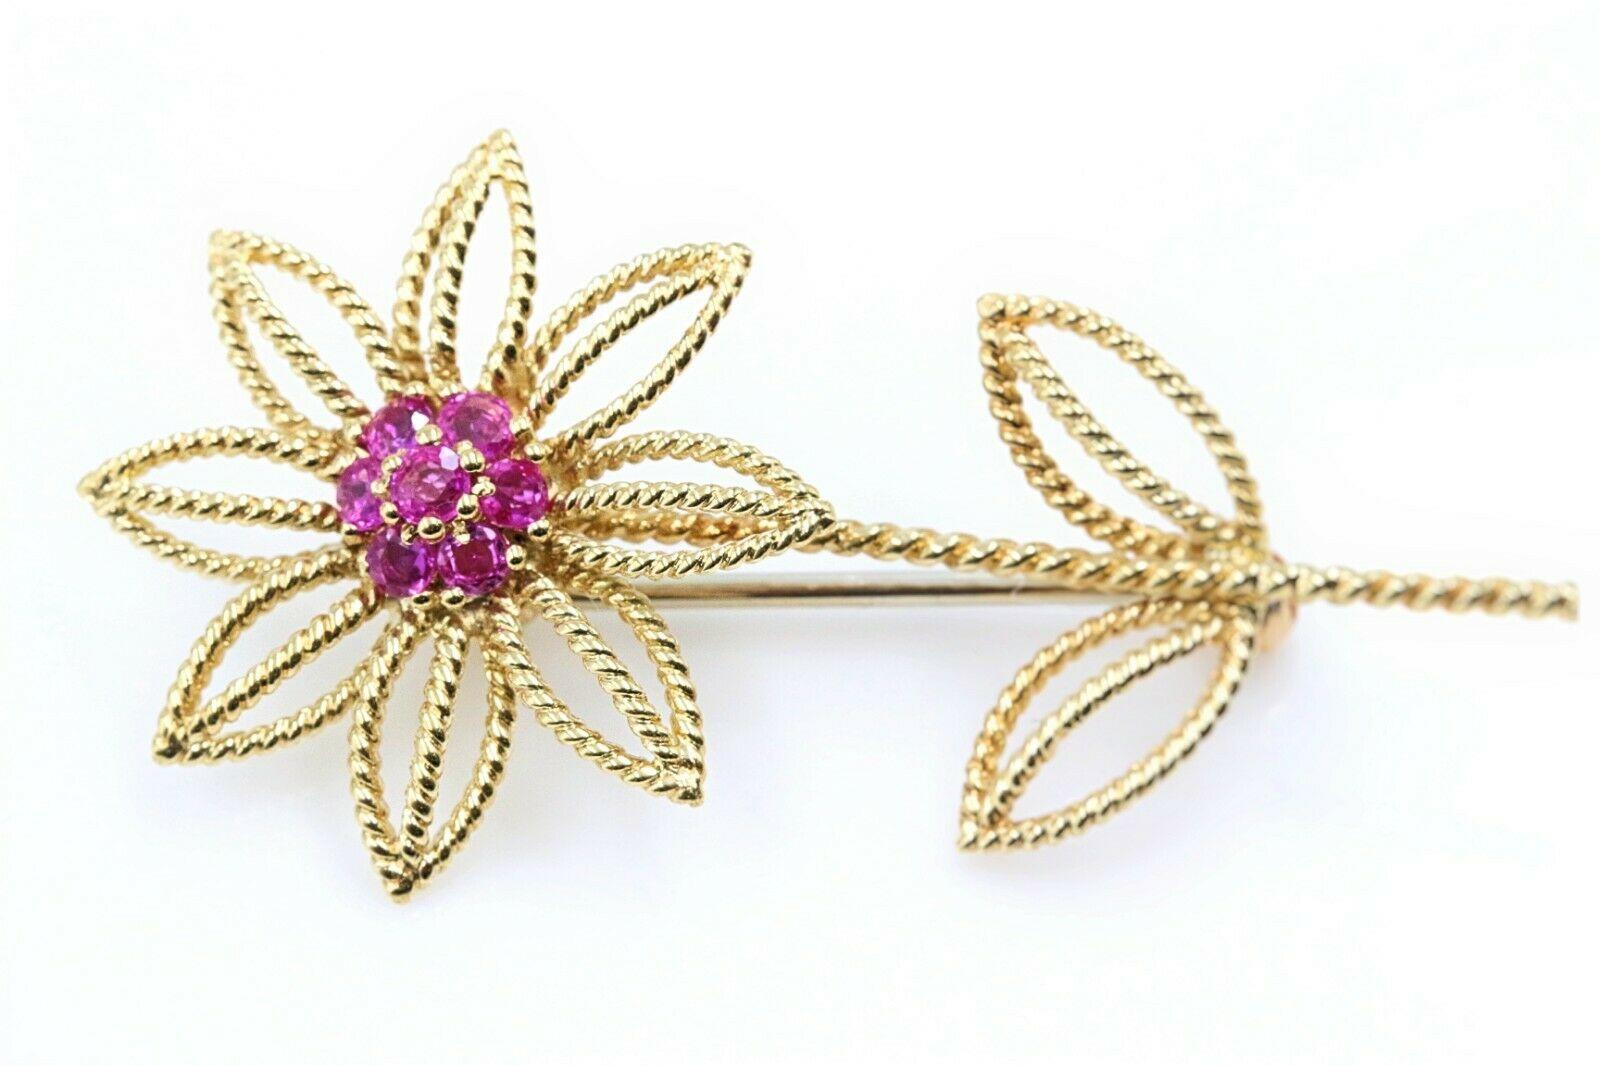 Authentic Vintage 1960s Tiffany & Co 18 Karat Gold Flower Brooch with Rubies 3